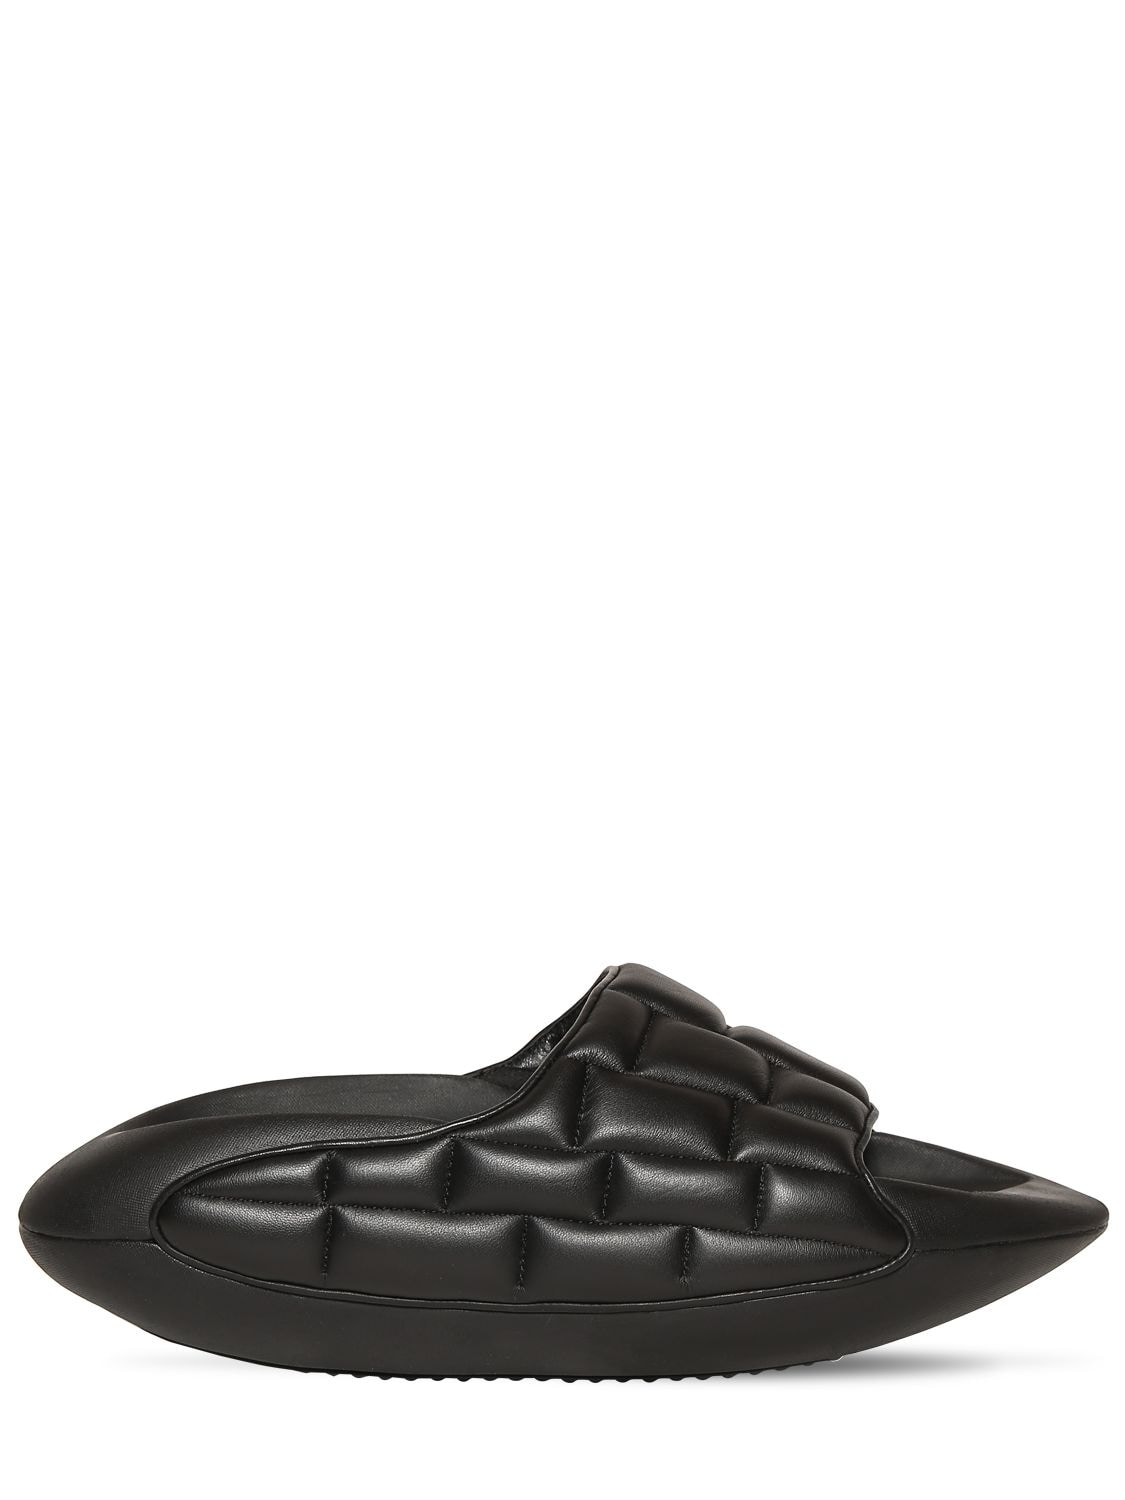 Balmain B-it Puffy Quilted Leather Slide Sandals In Black | ModeSens